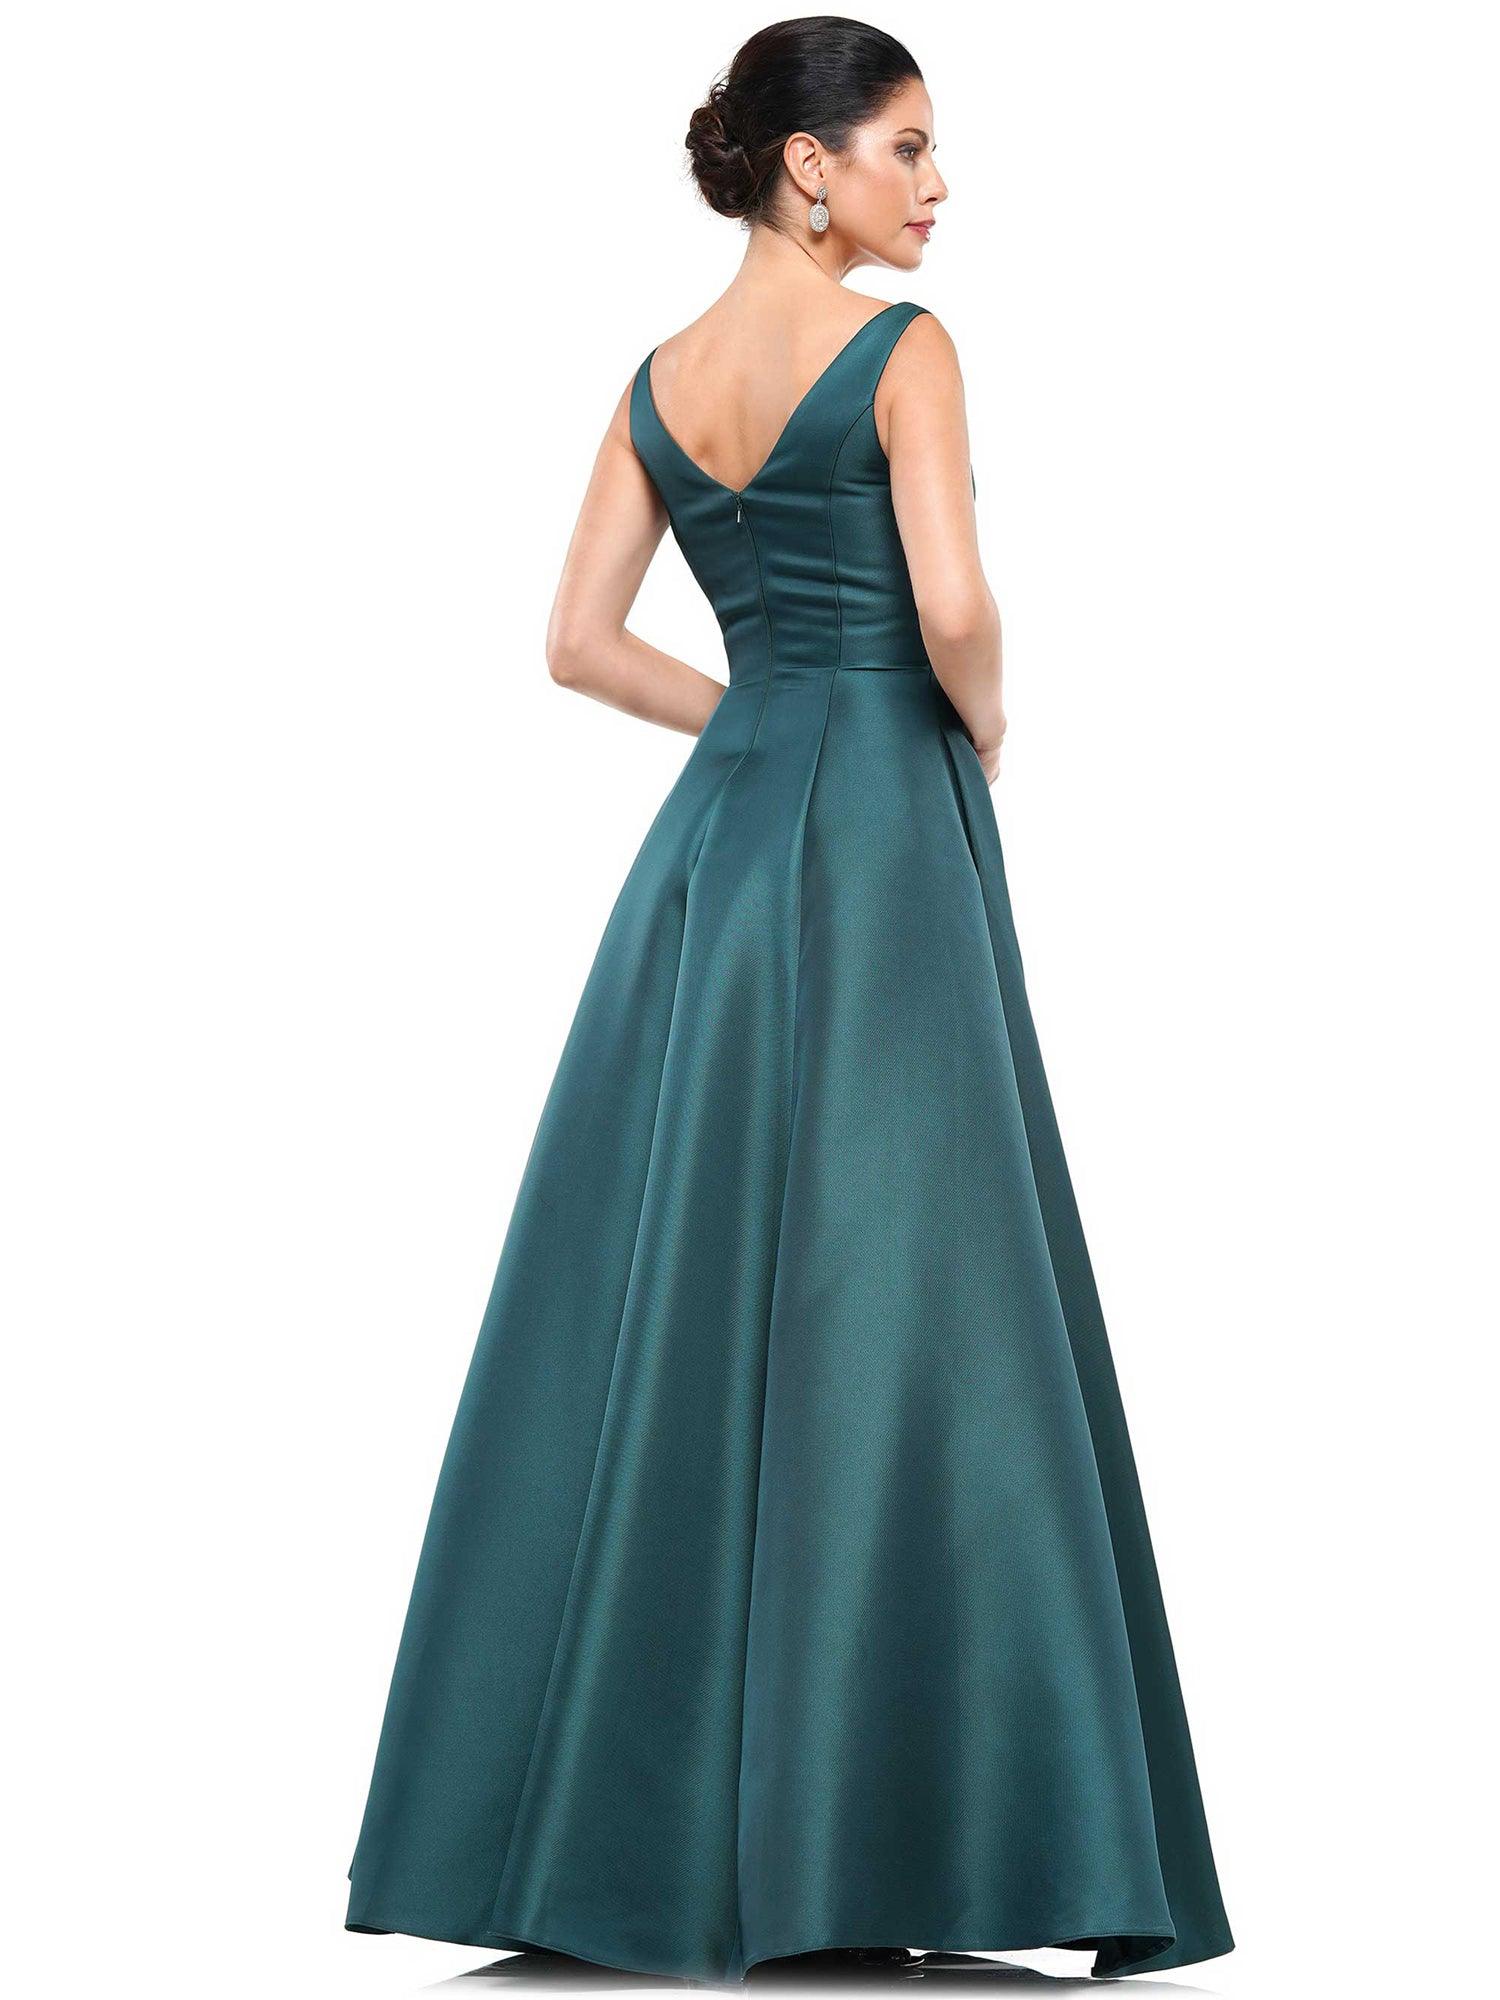 Marsoni Formal Long Mother of the Bride Dress 1009 - The Dress Outlet